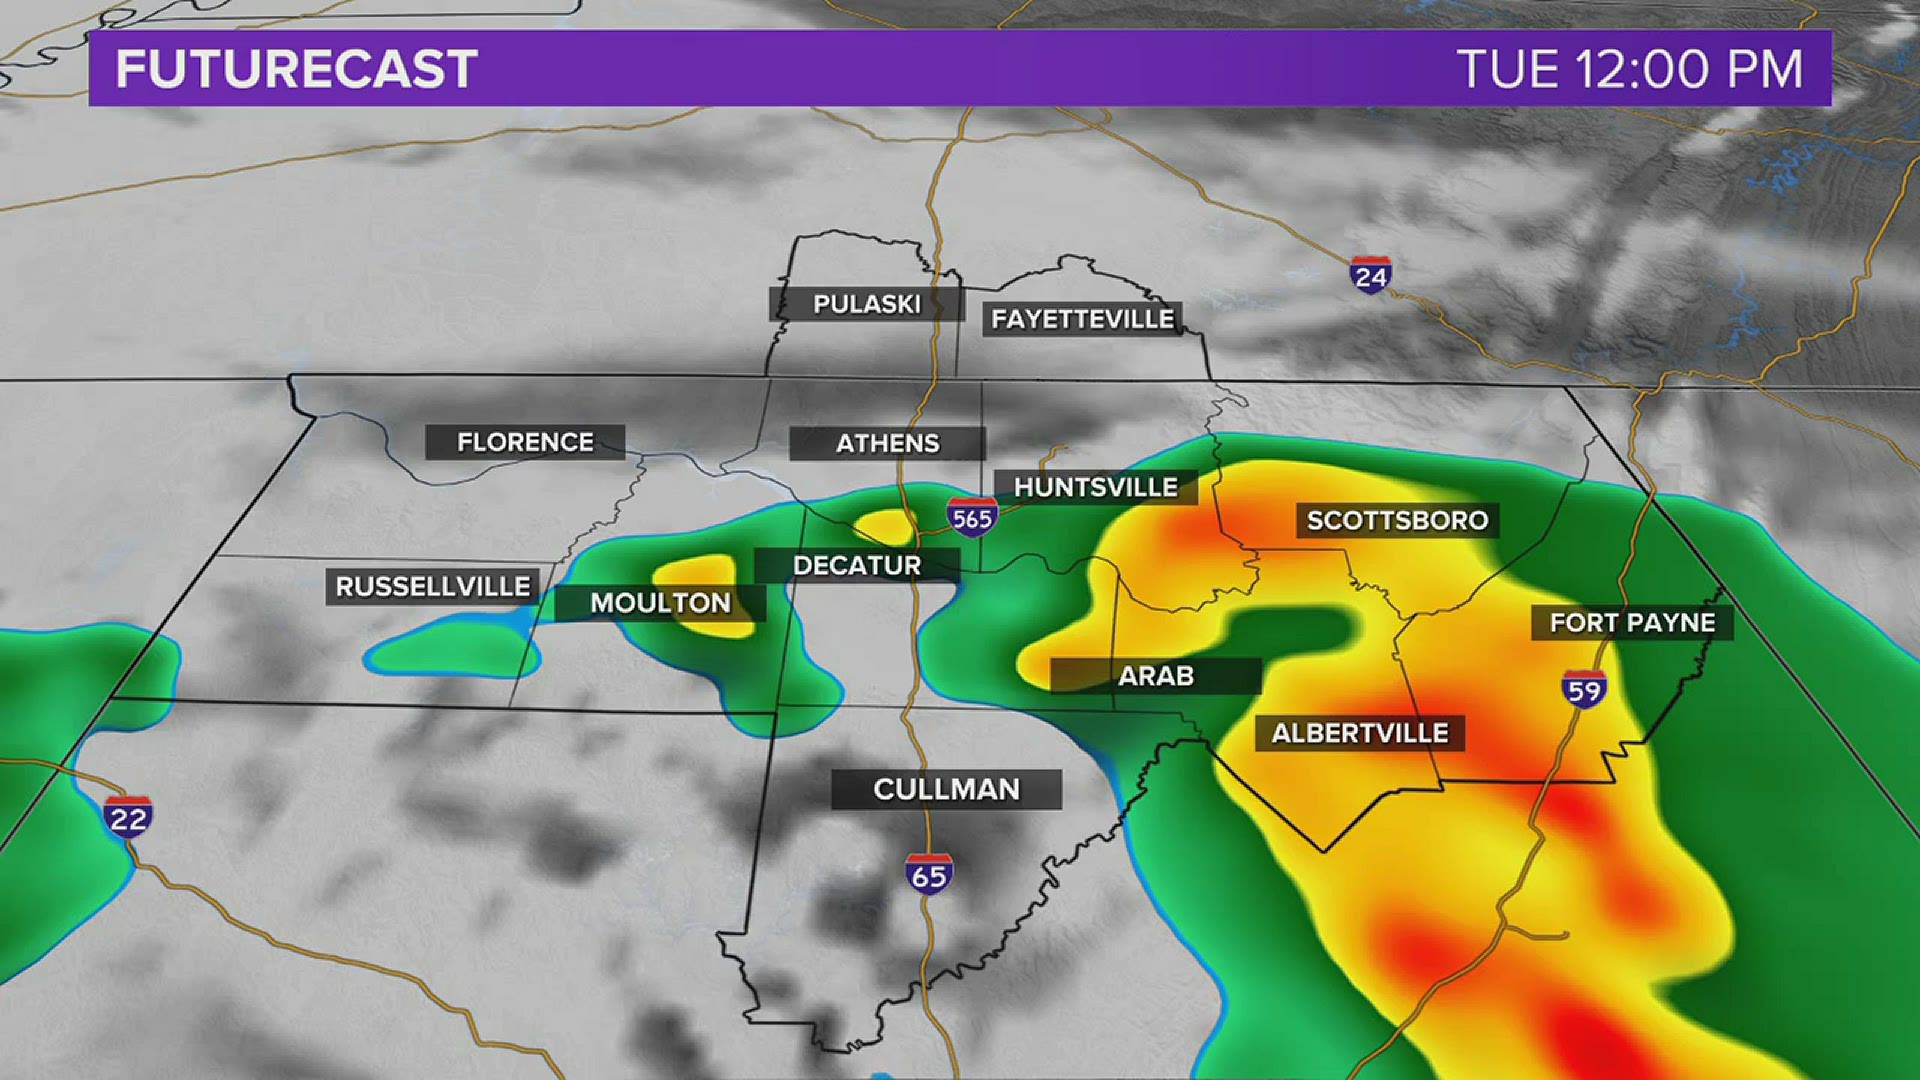 Futurecast for May 11, 2021